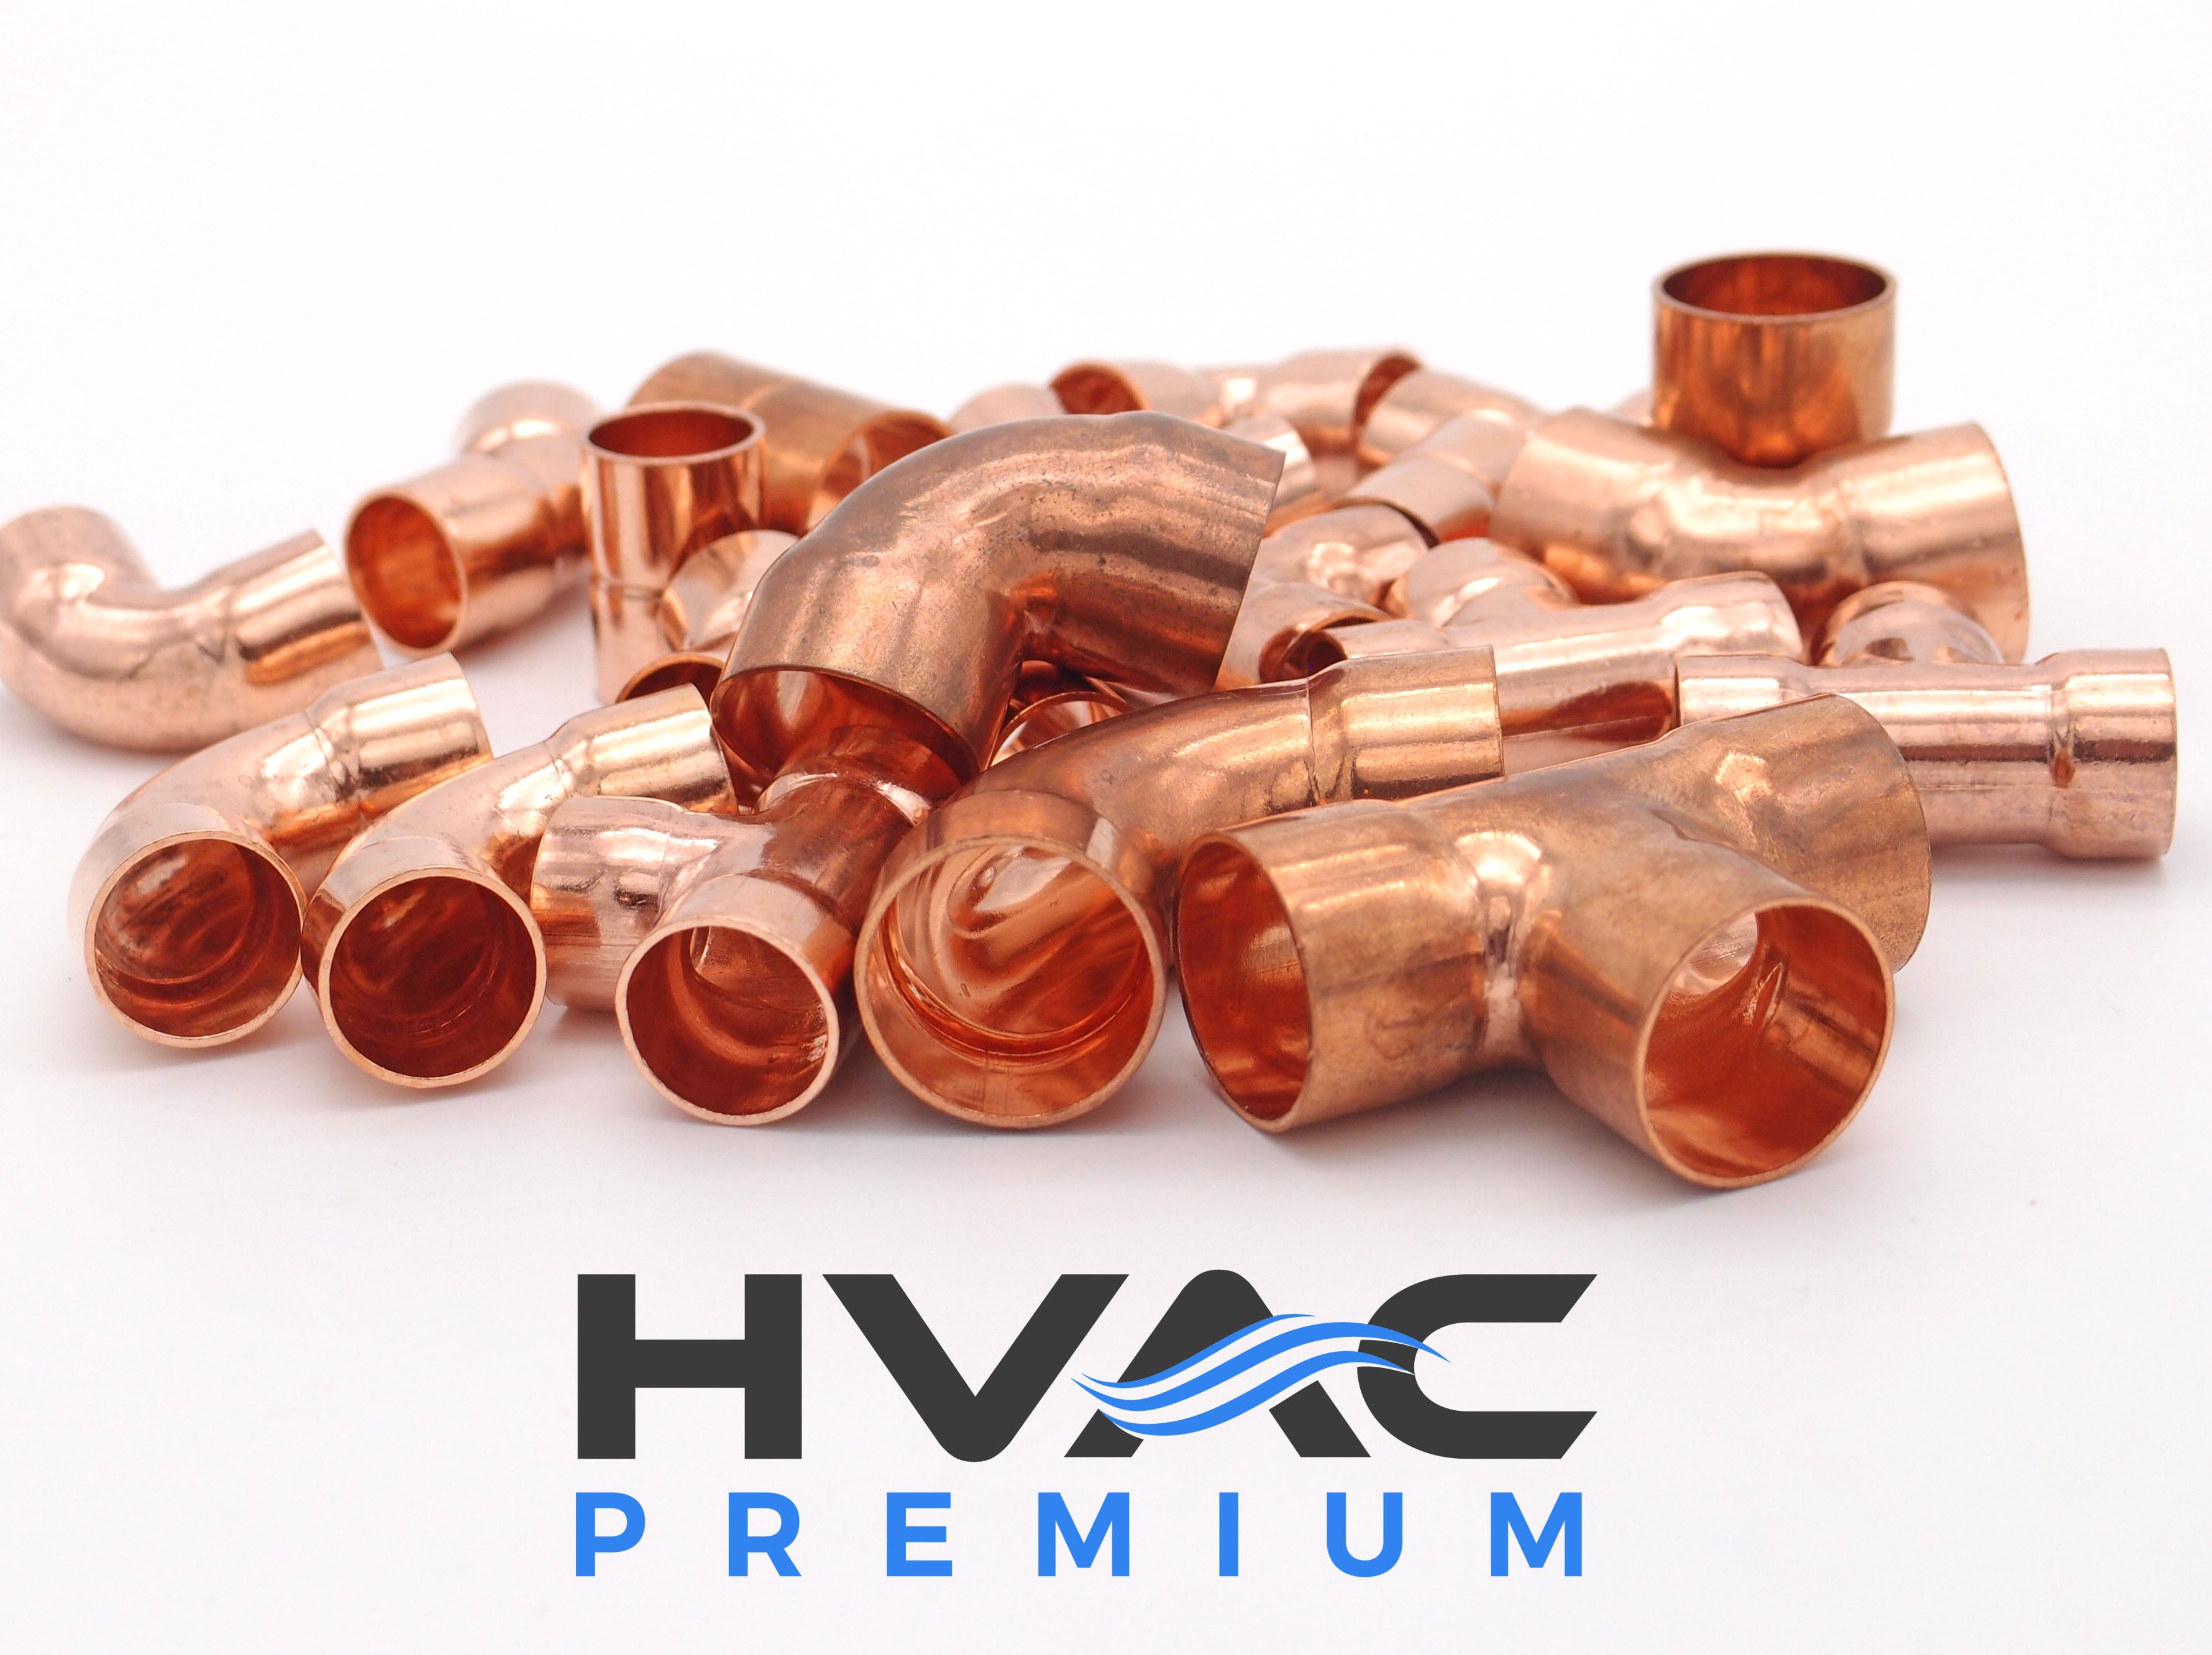 Copper Fitting 1/4 Inch (HVAC Outer Dimension) 1/8 Inch (Plumbing Inner Dimension) - Straight Copper Coupling Fittings With Rolled Tube Stop & HVAC – 99.9% Pure Copper - 10 Pack